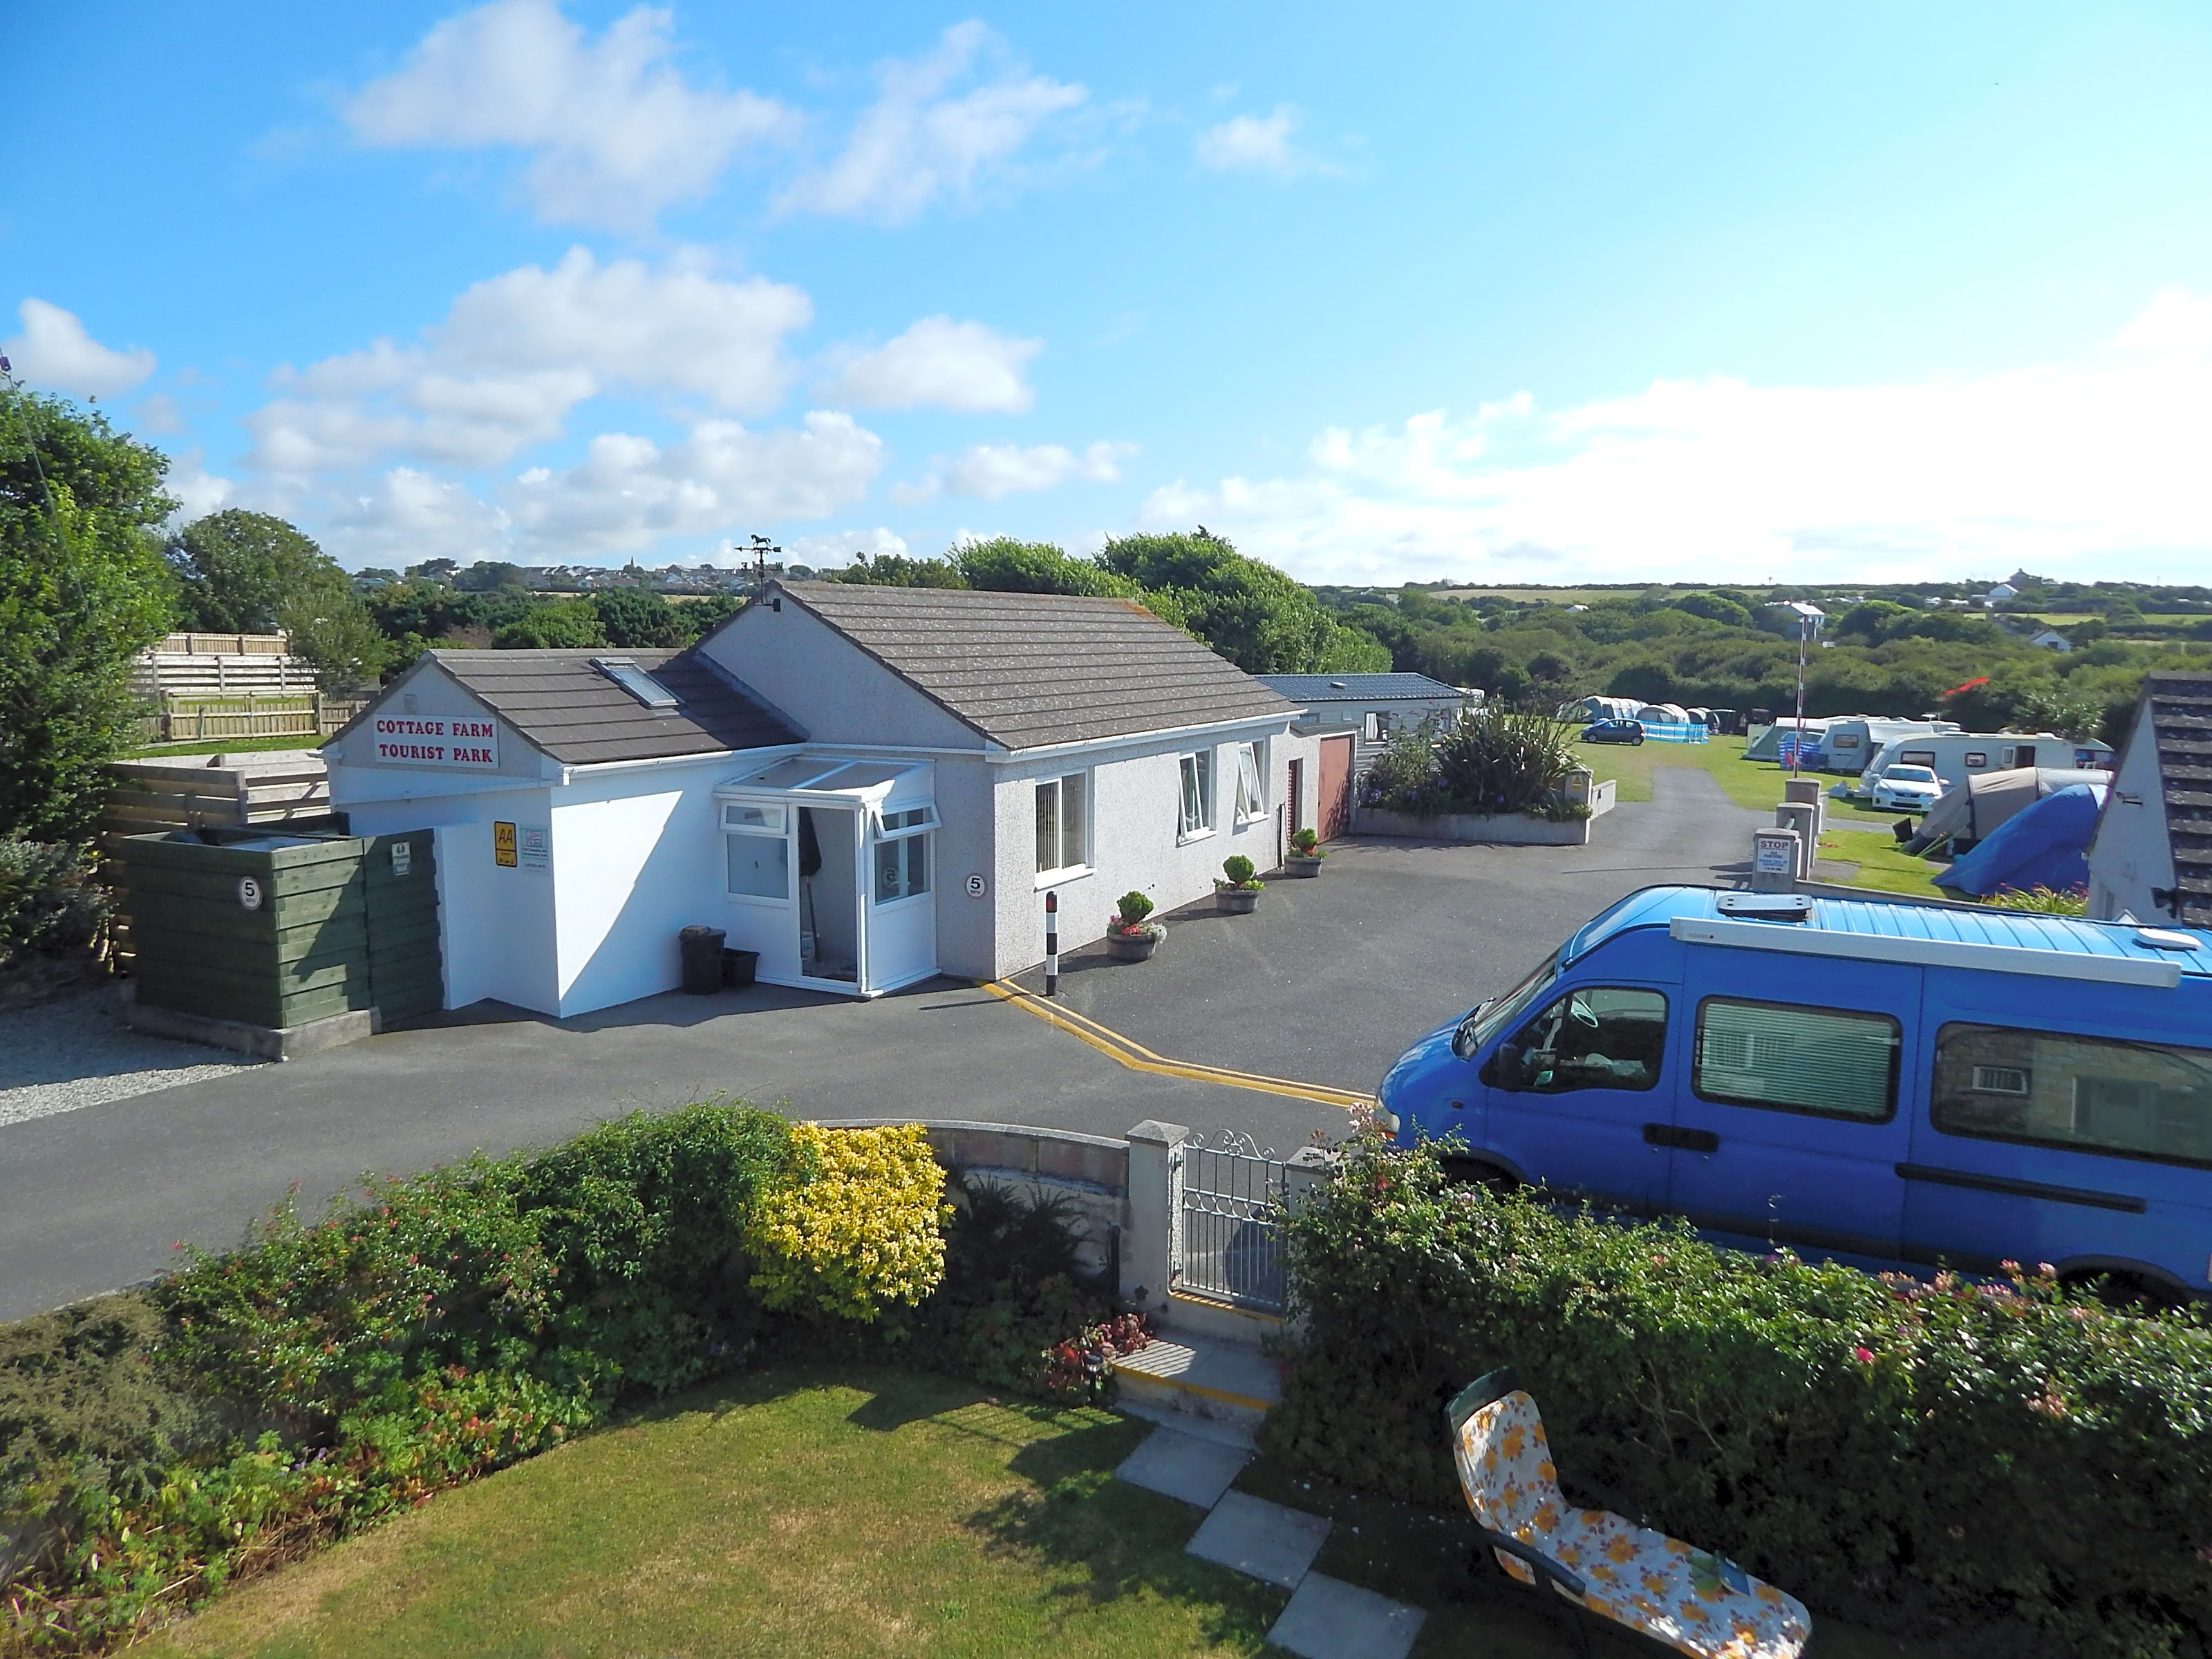 Cottage Farm Touring Park Newquay Updated 2020 Prices Pitchup